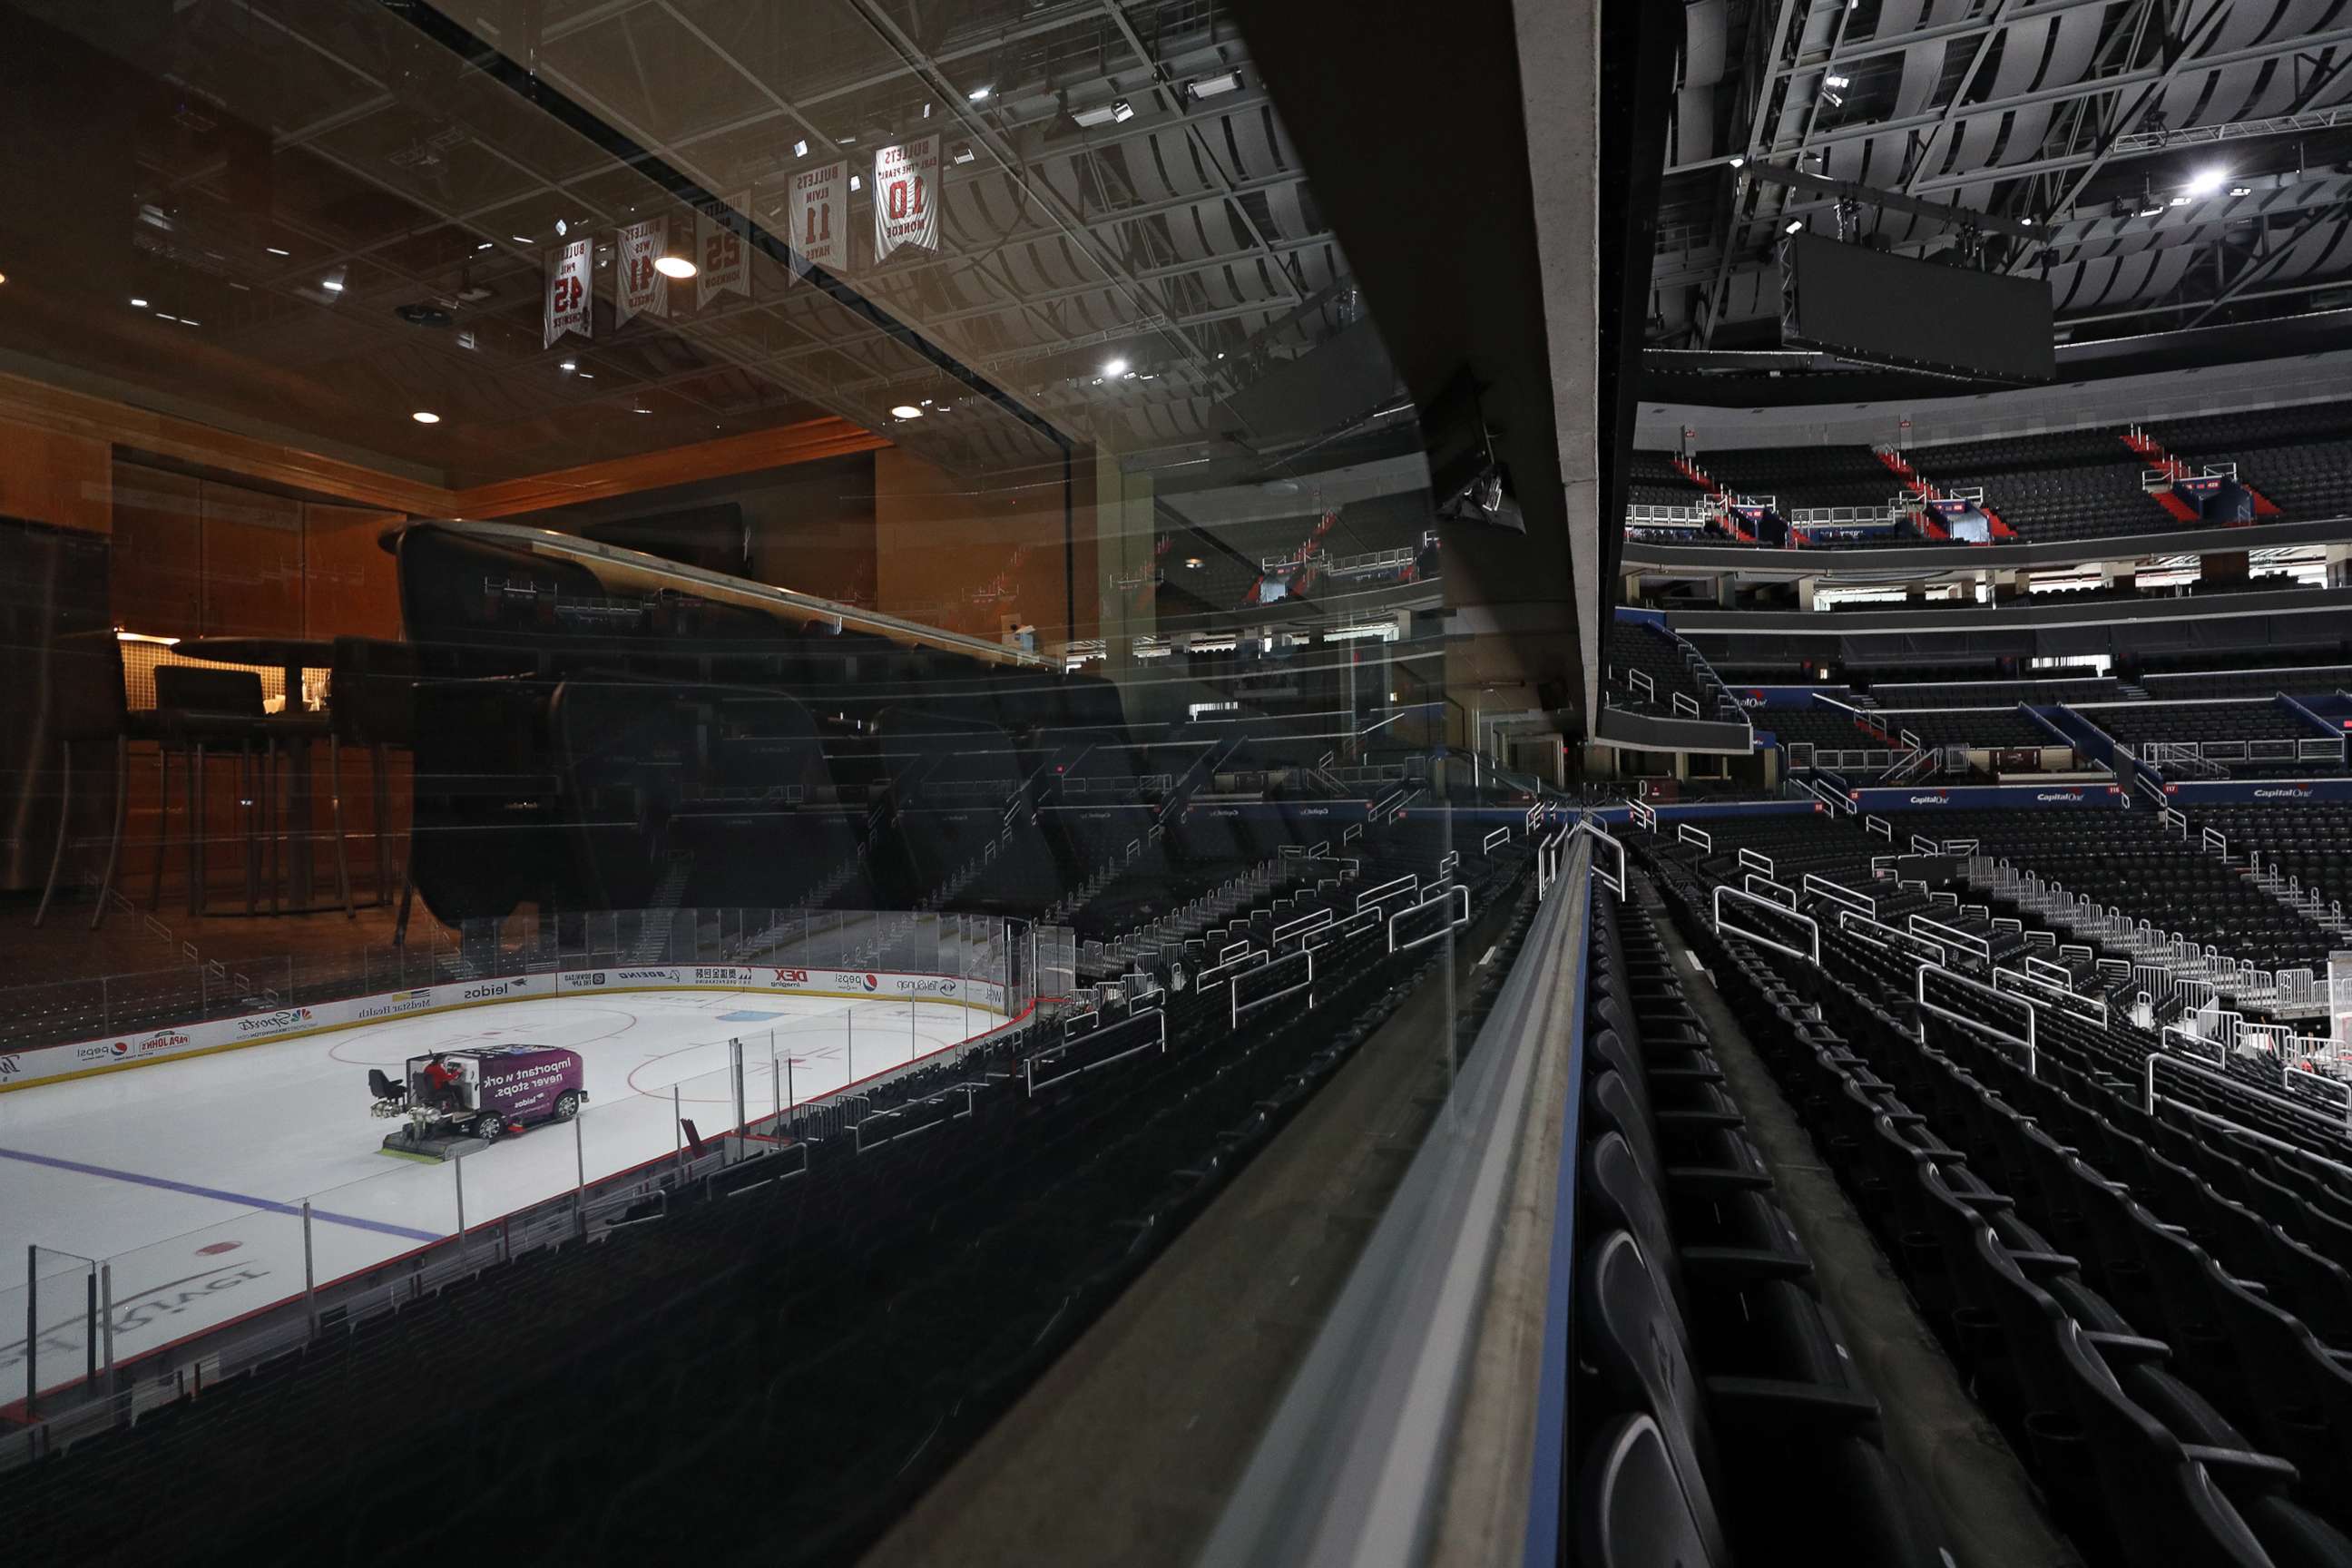 PHOTO: The ice is cleaned and spectator seating is empty prior to the Detroit Red Wings playing against the Washington Capitals at Capital One Arena on March 12, 2020 in Washington.